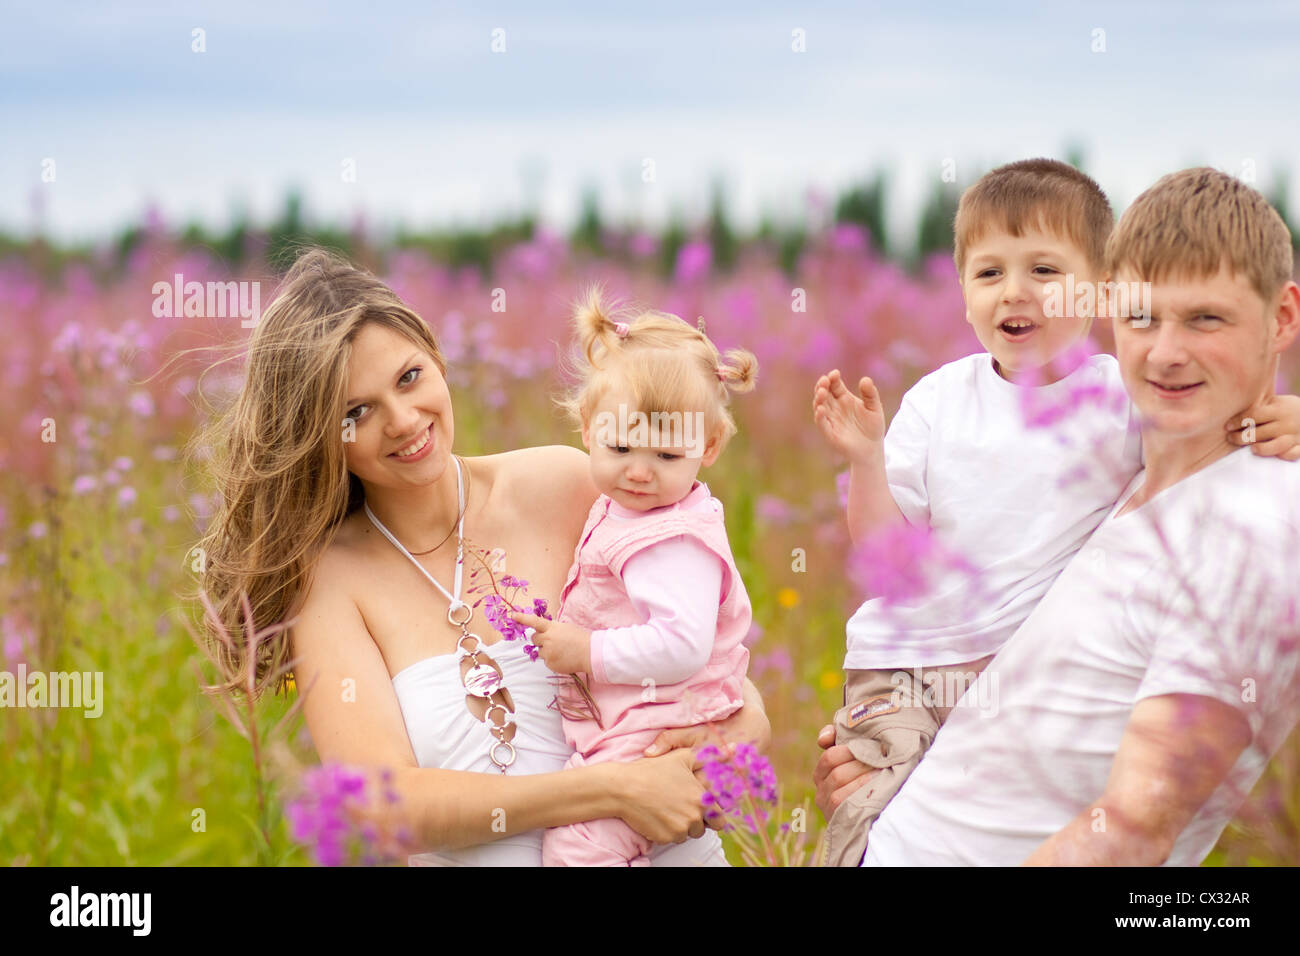 Happy family together in meadow Stock Photo